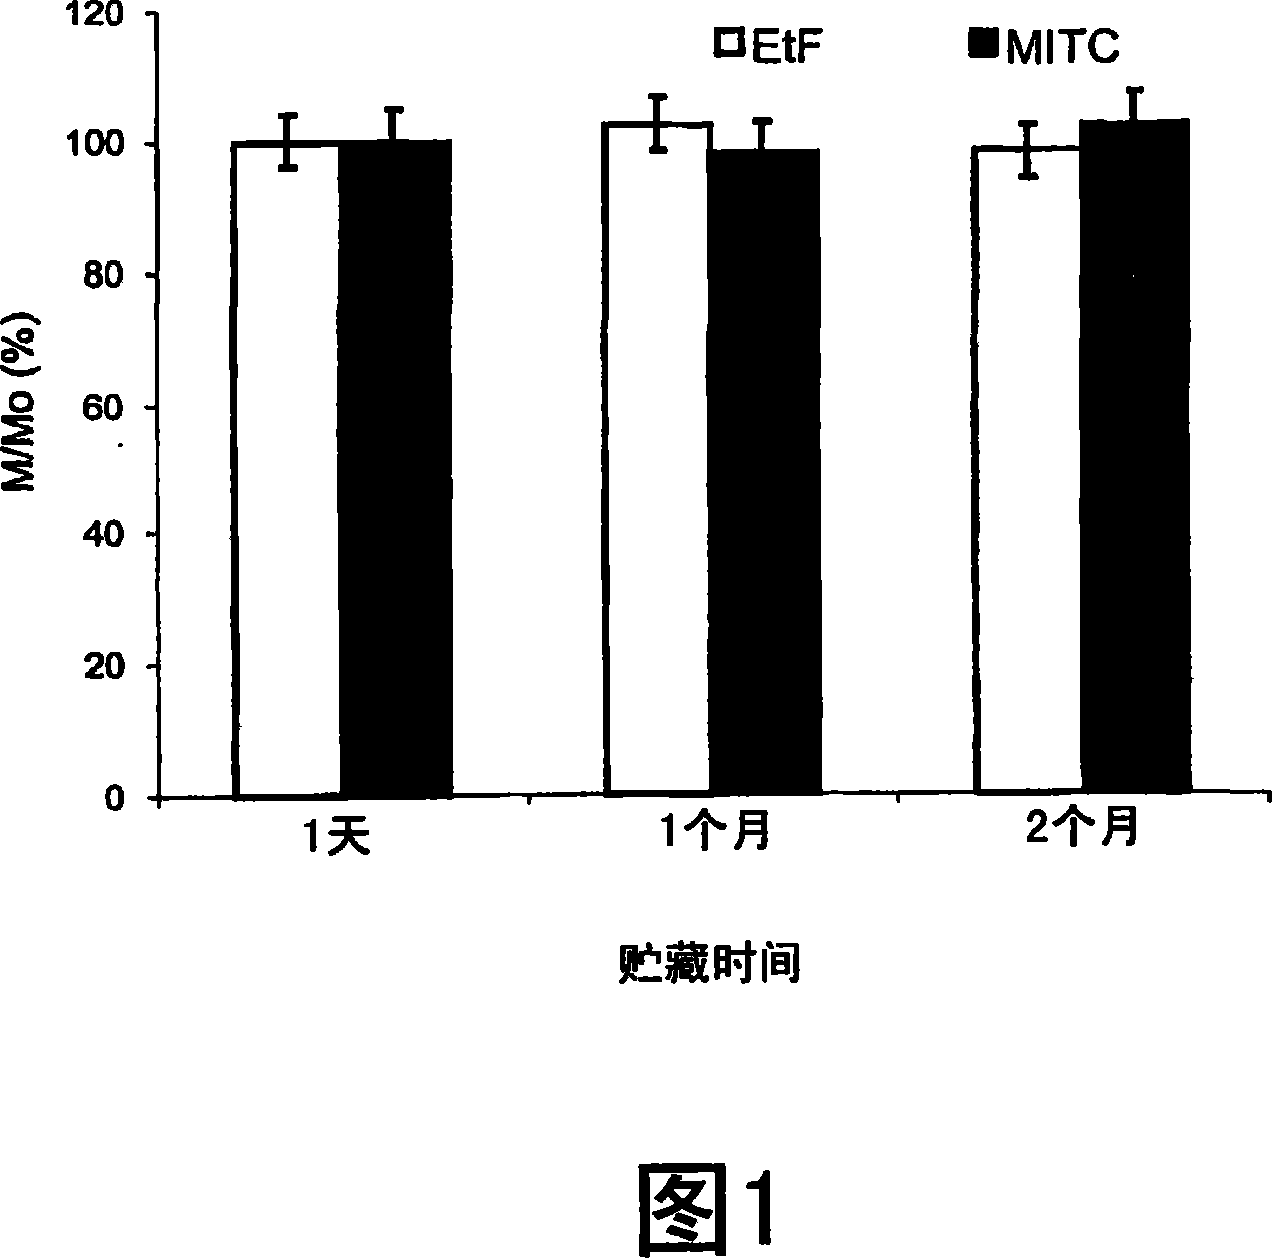 Pesticide compositions and methods